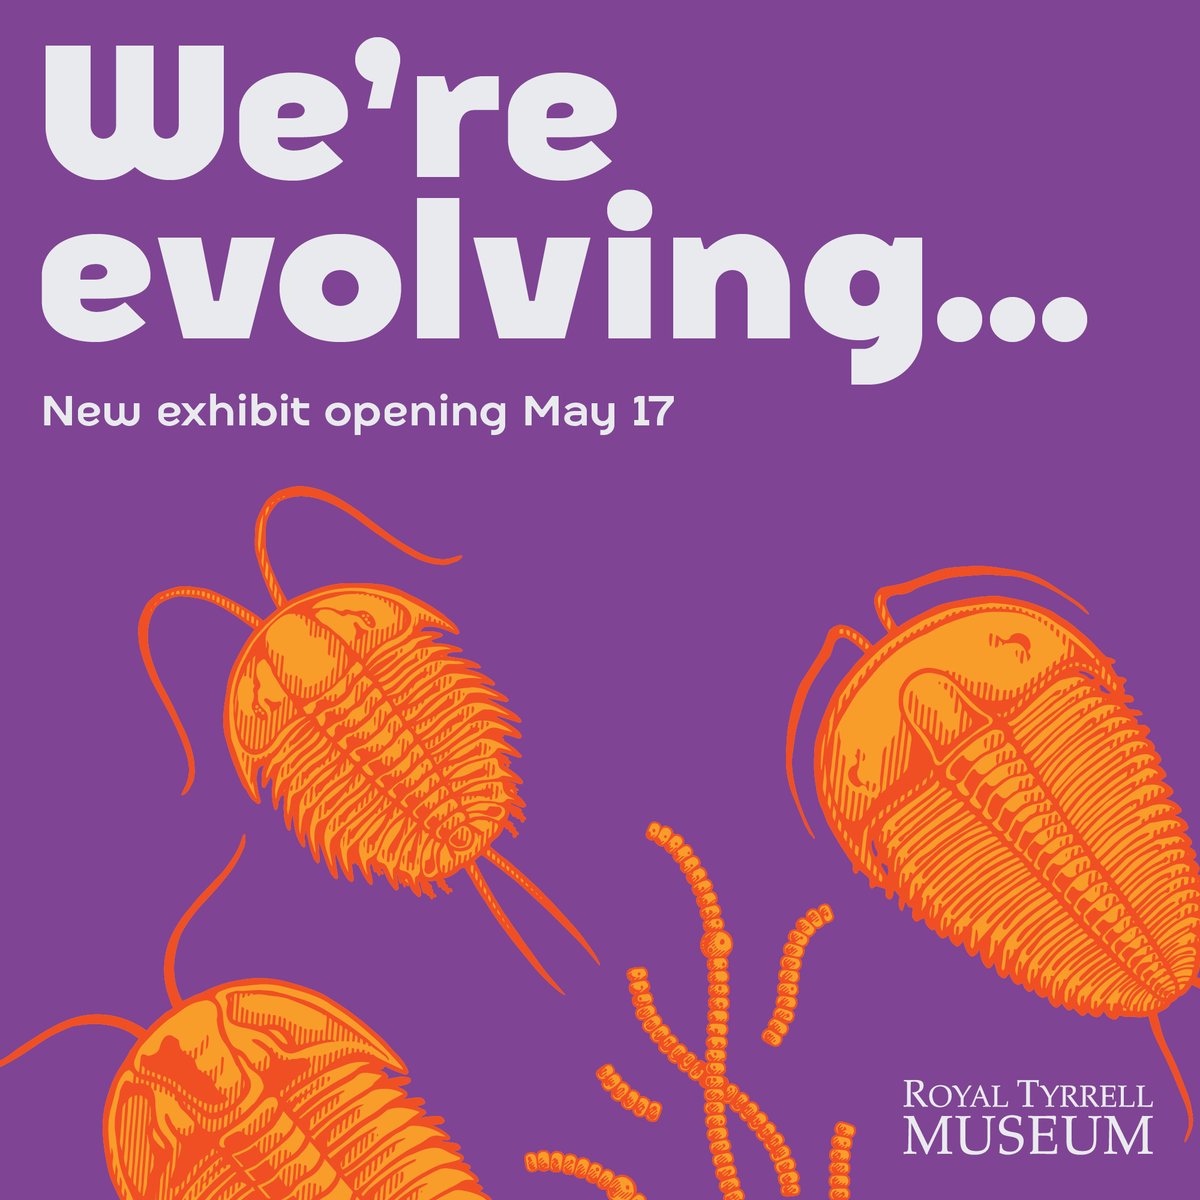 Our new “First Life” exhibit opens on Friday, May 17! 🟣 Meet some of the oldest known fossils, including the earliest evidence of life in Alberta. 🟣 Learn about where and when life began. 🟣 Discover the unique story Canadian fossils tell us about early life.